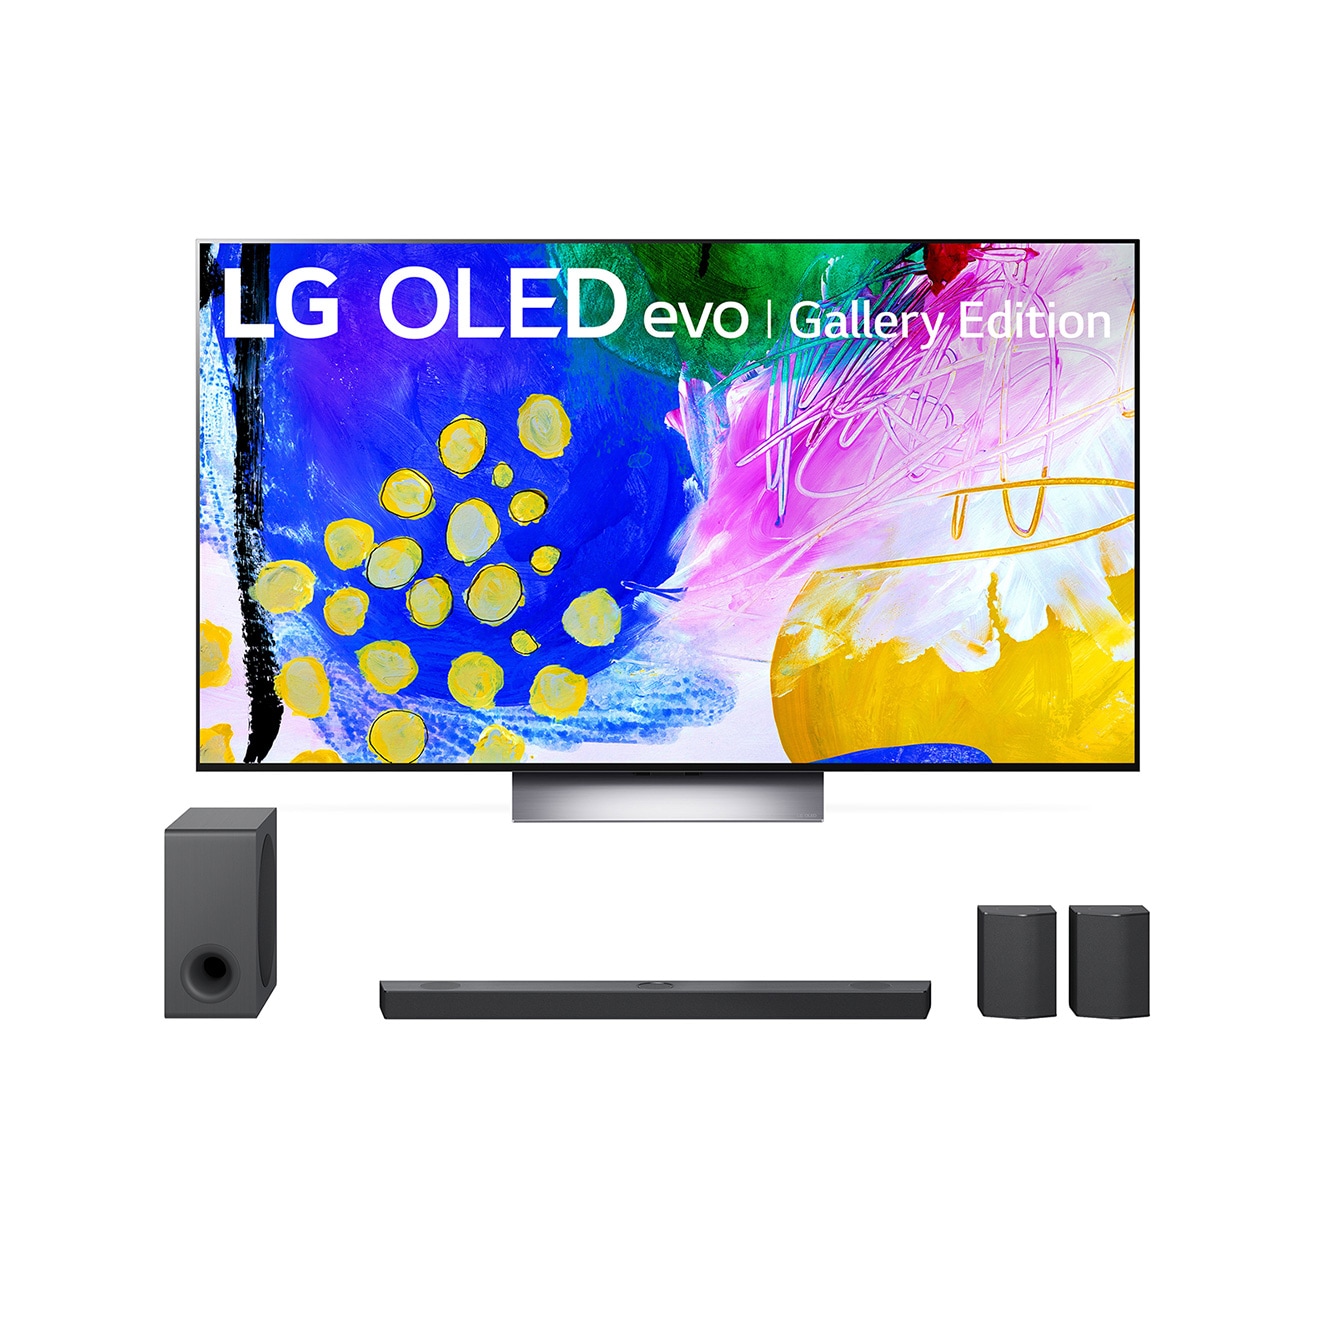 LG Audio: Home Theater Sound Systems